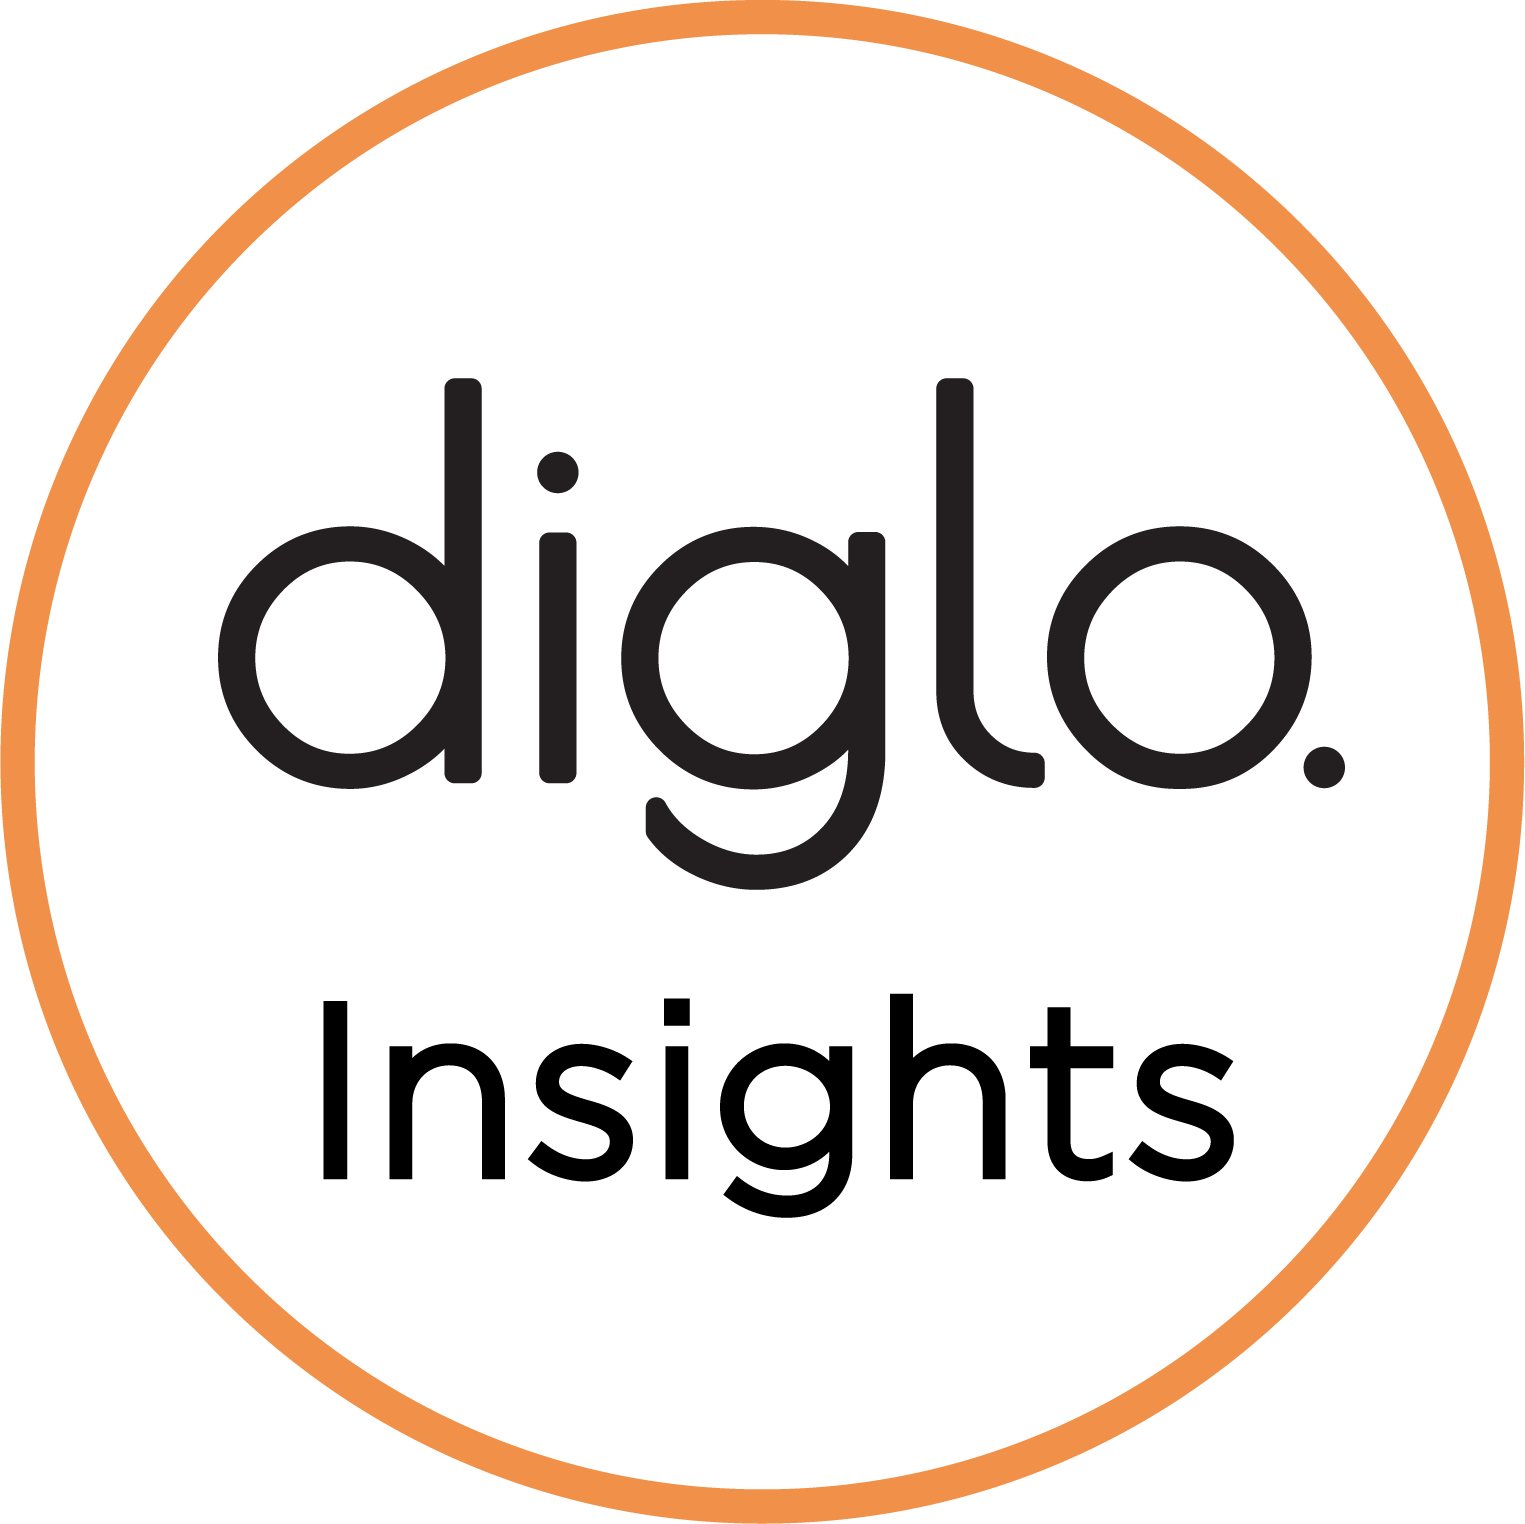 Diglo Insights